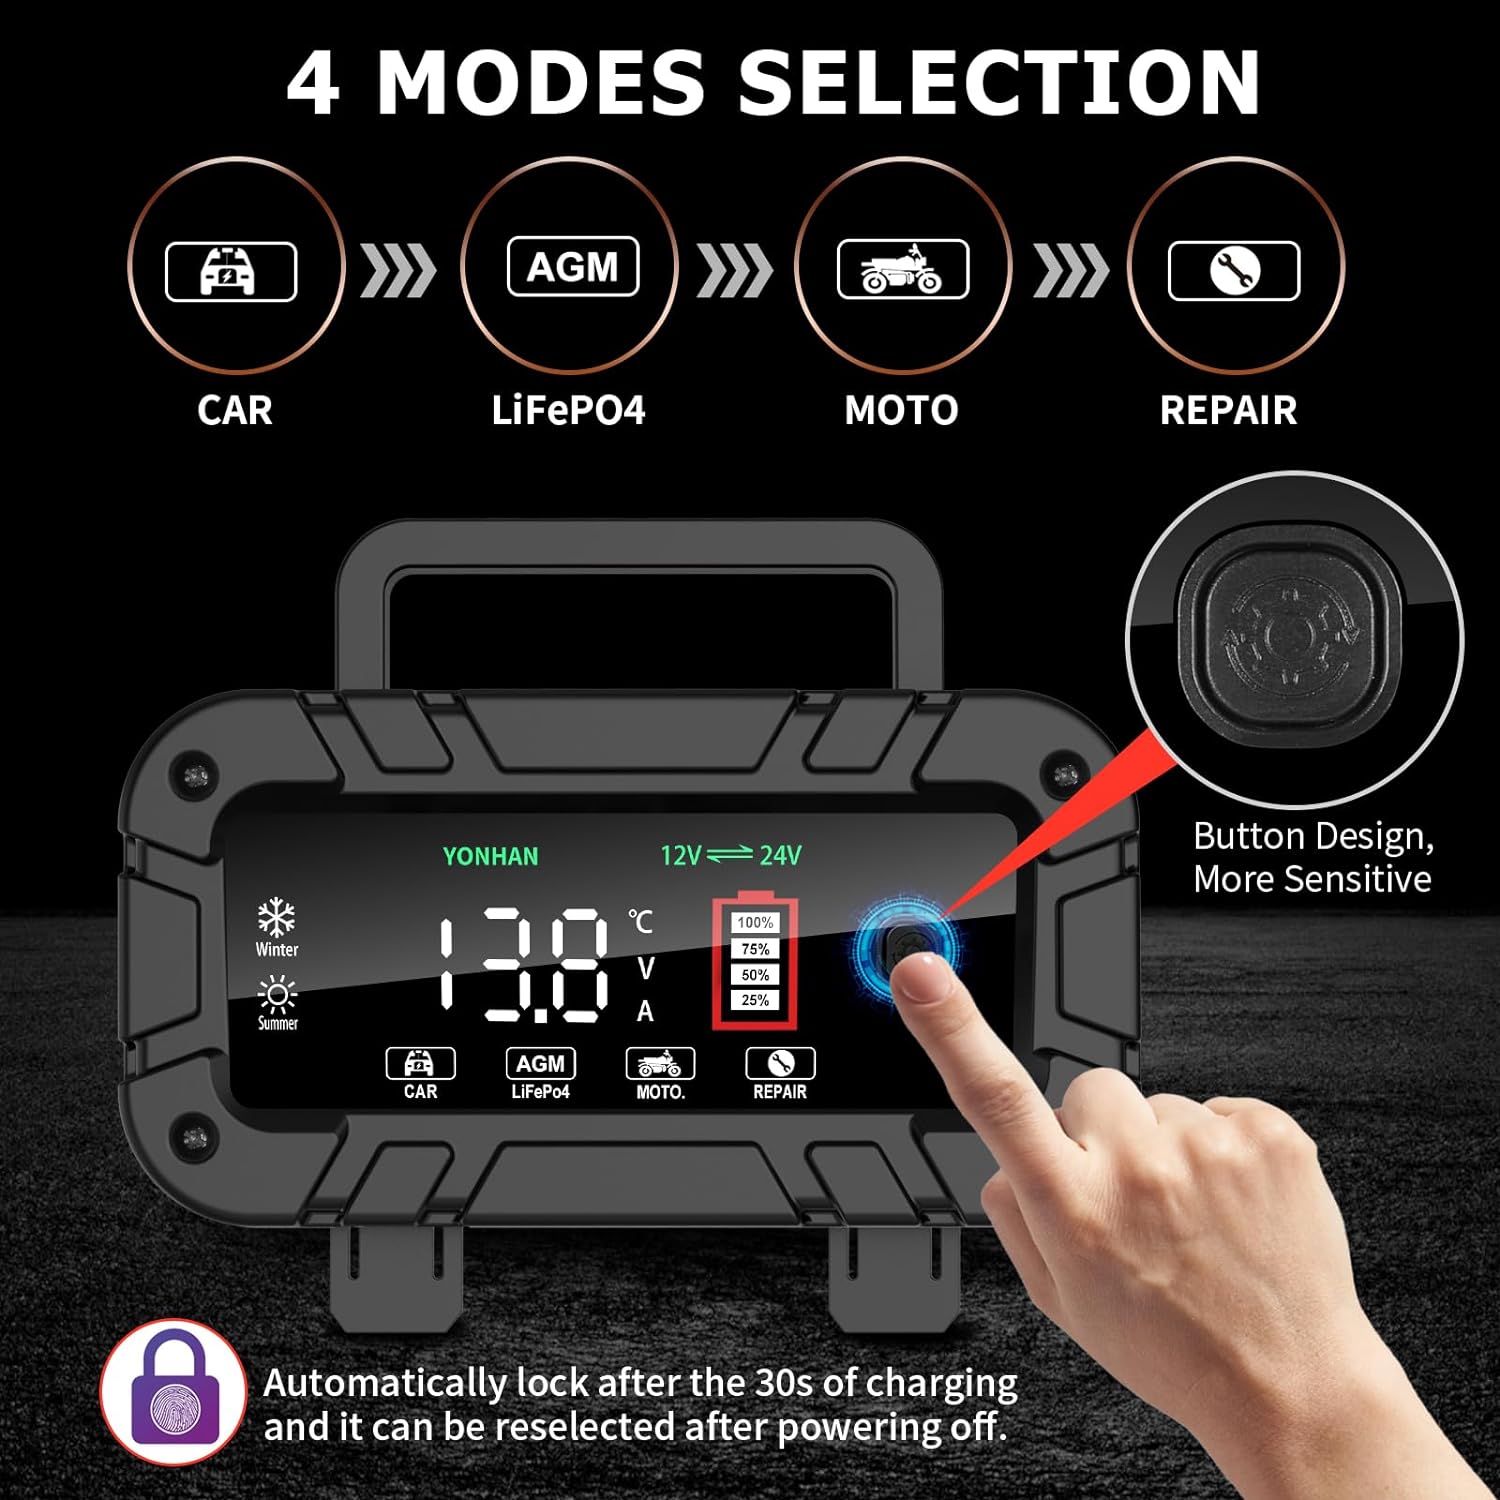 YONHAN Battery Charger 10 Amp, Upgraded 12V/24V LiFePO4 Lead Acid Portable Car Battery Charger w/Large Display Screen, Fully-Automatic Smart Trickle Charger Automotive, Battery Maintainer - YONHAN Battery Charger 10 Amp Review